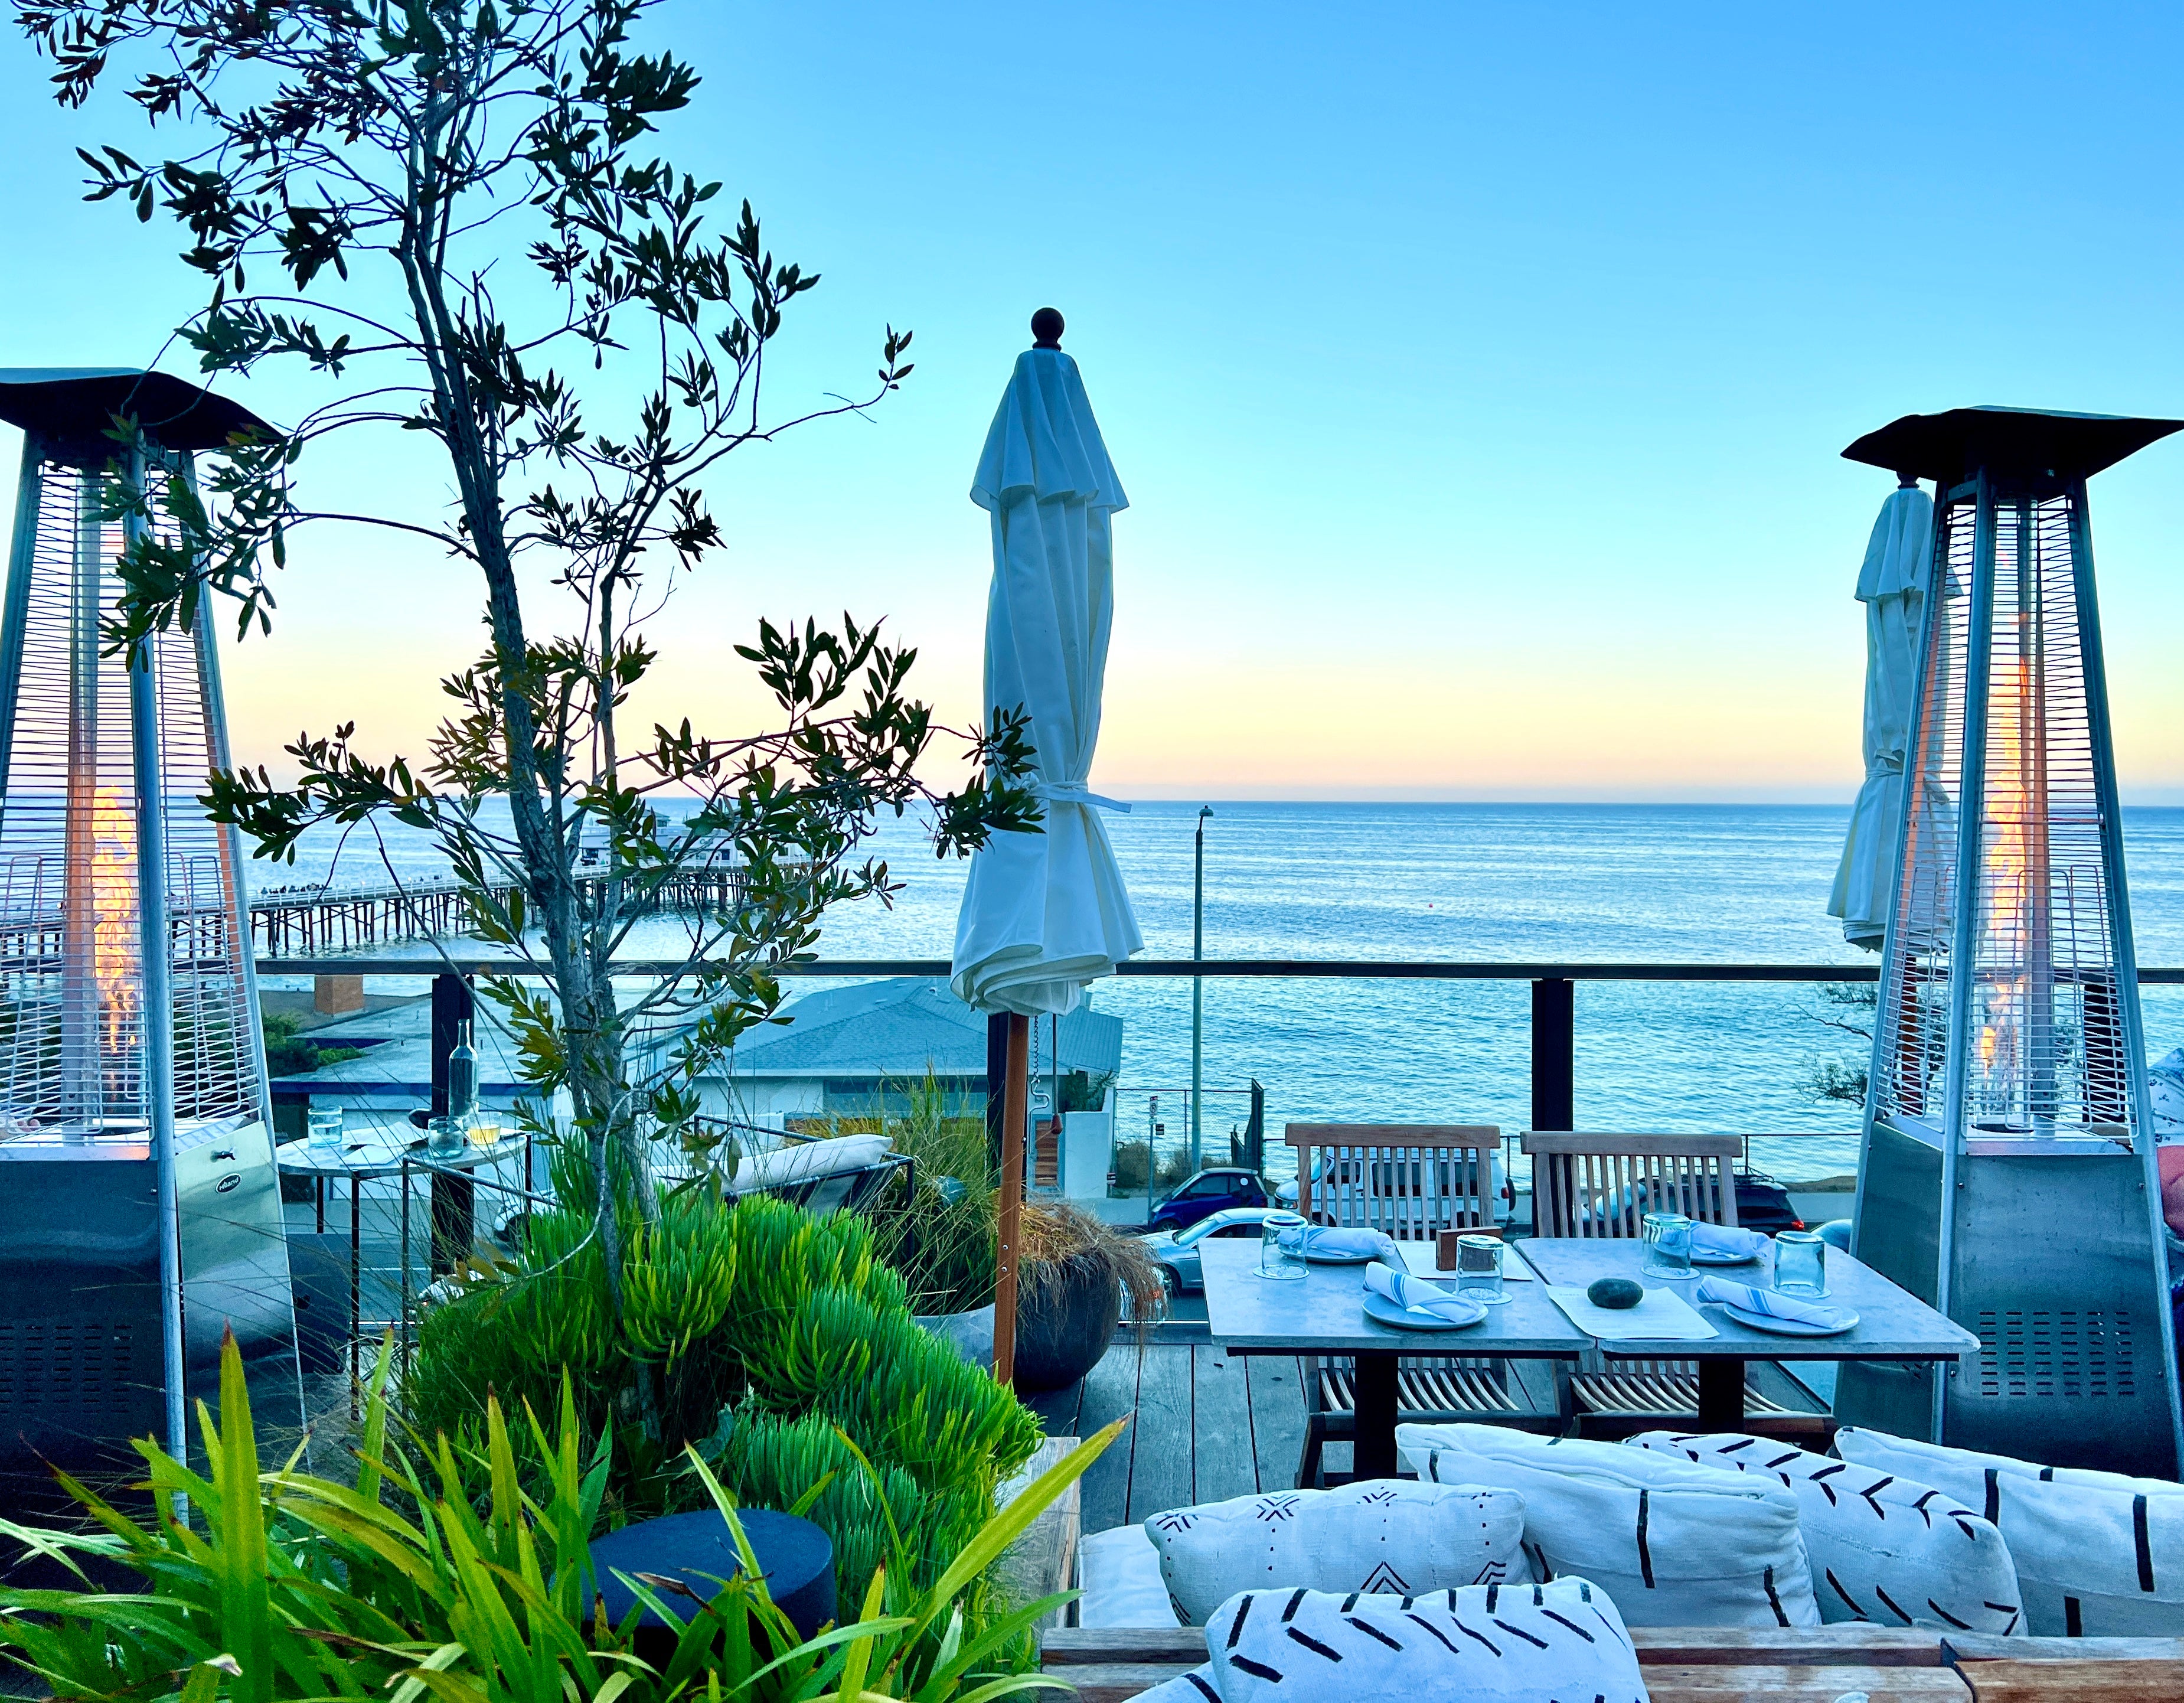 The rooftop restaurant at the Surfrider Hotel in Malibu